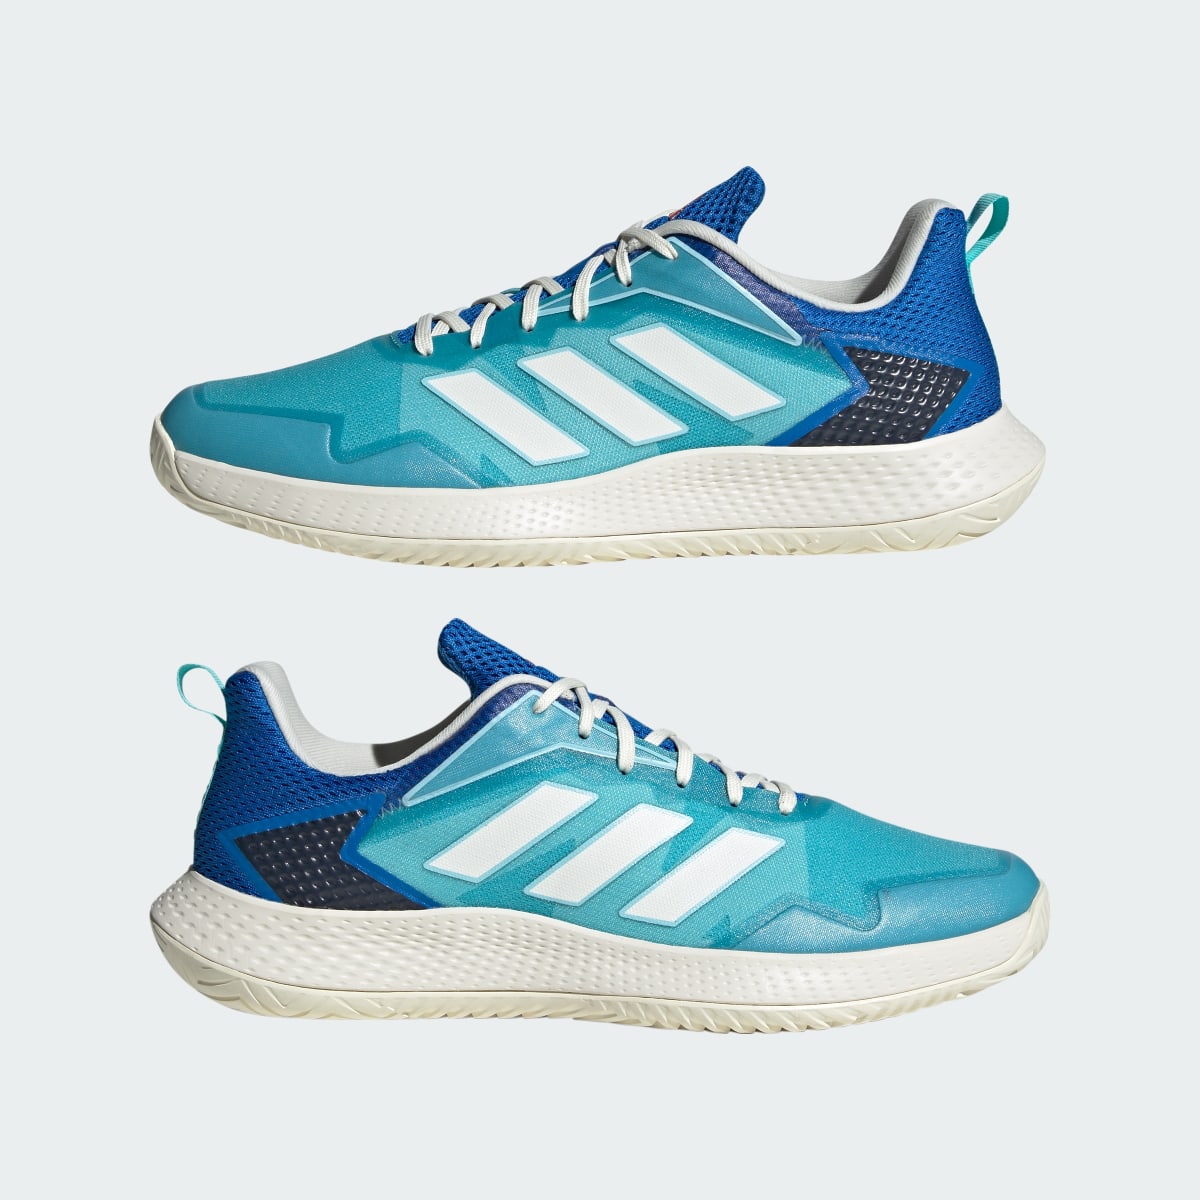 Adidas Defiant Speed Tennis Shoes. 11